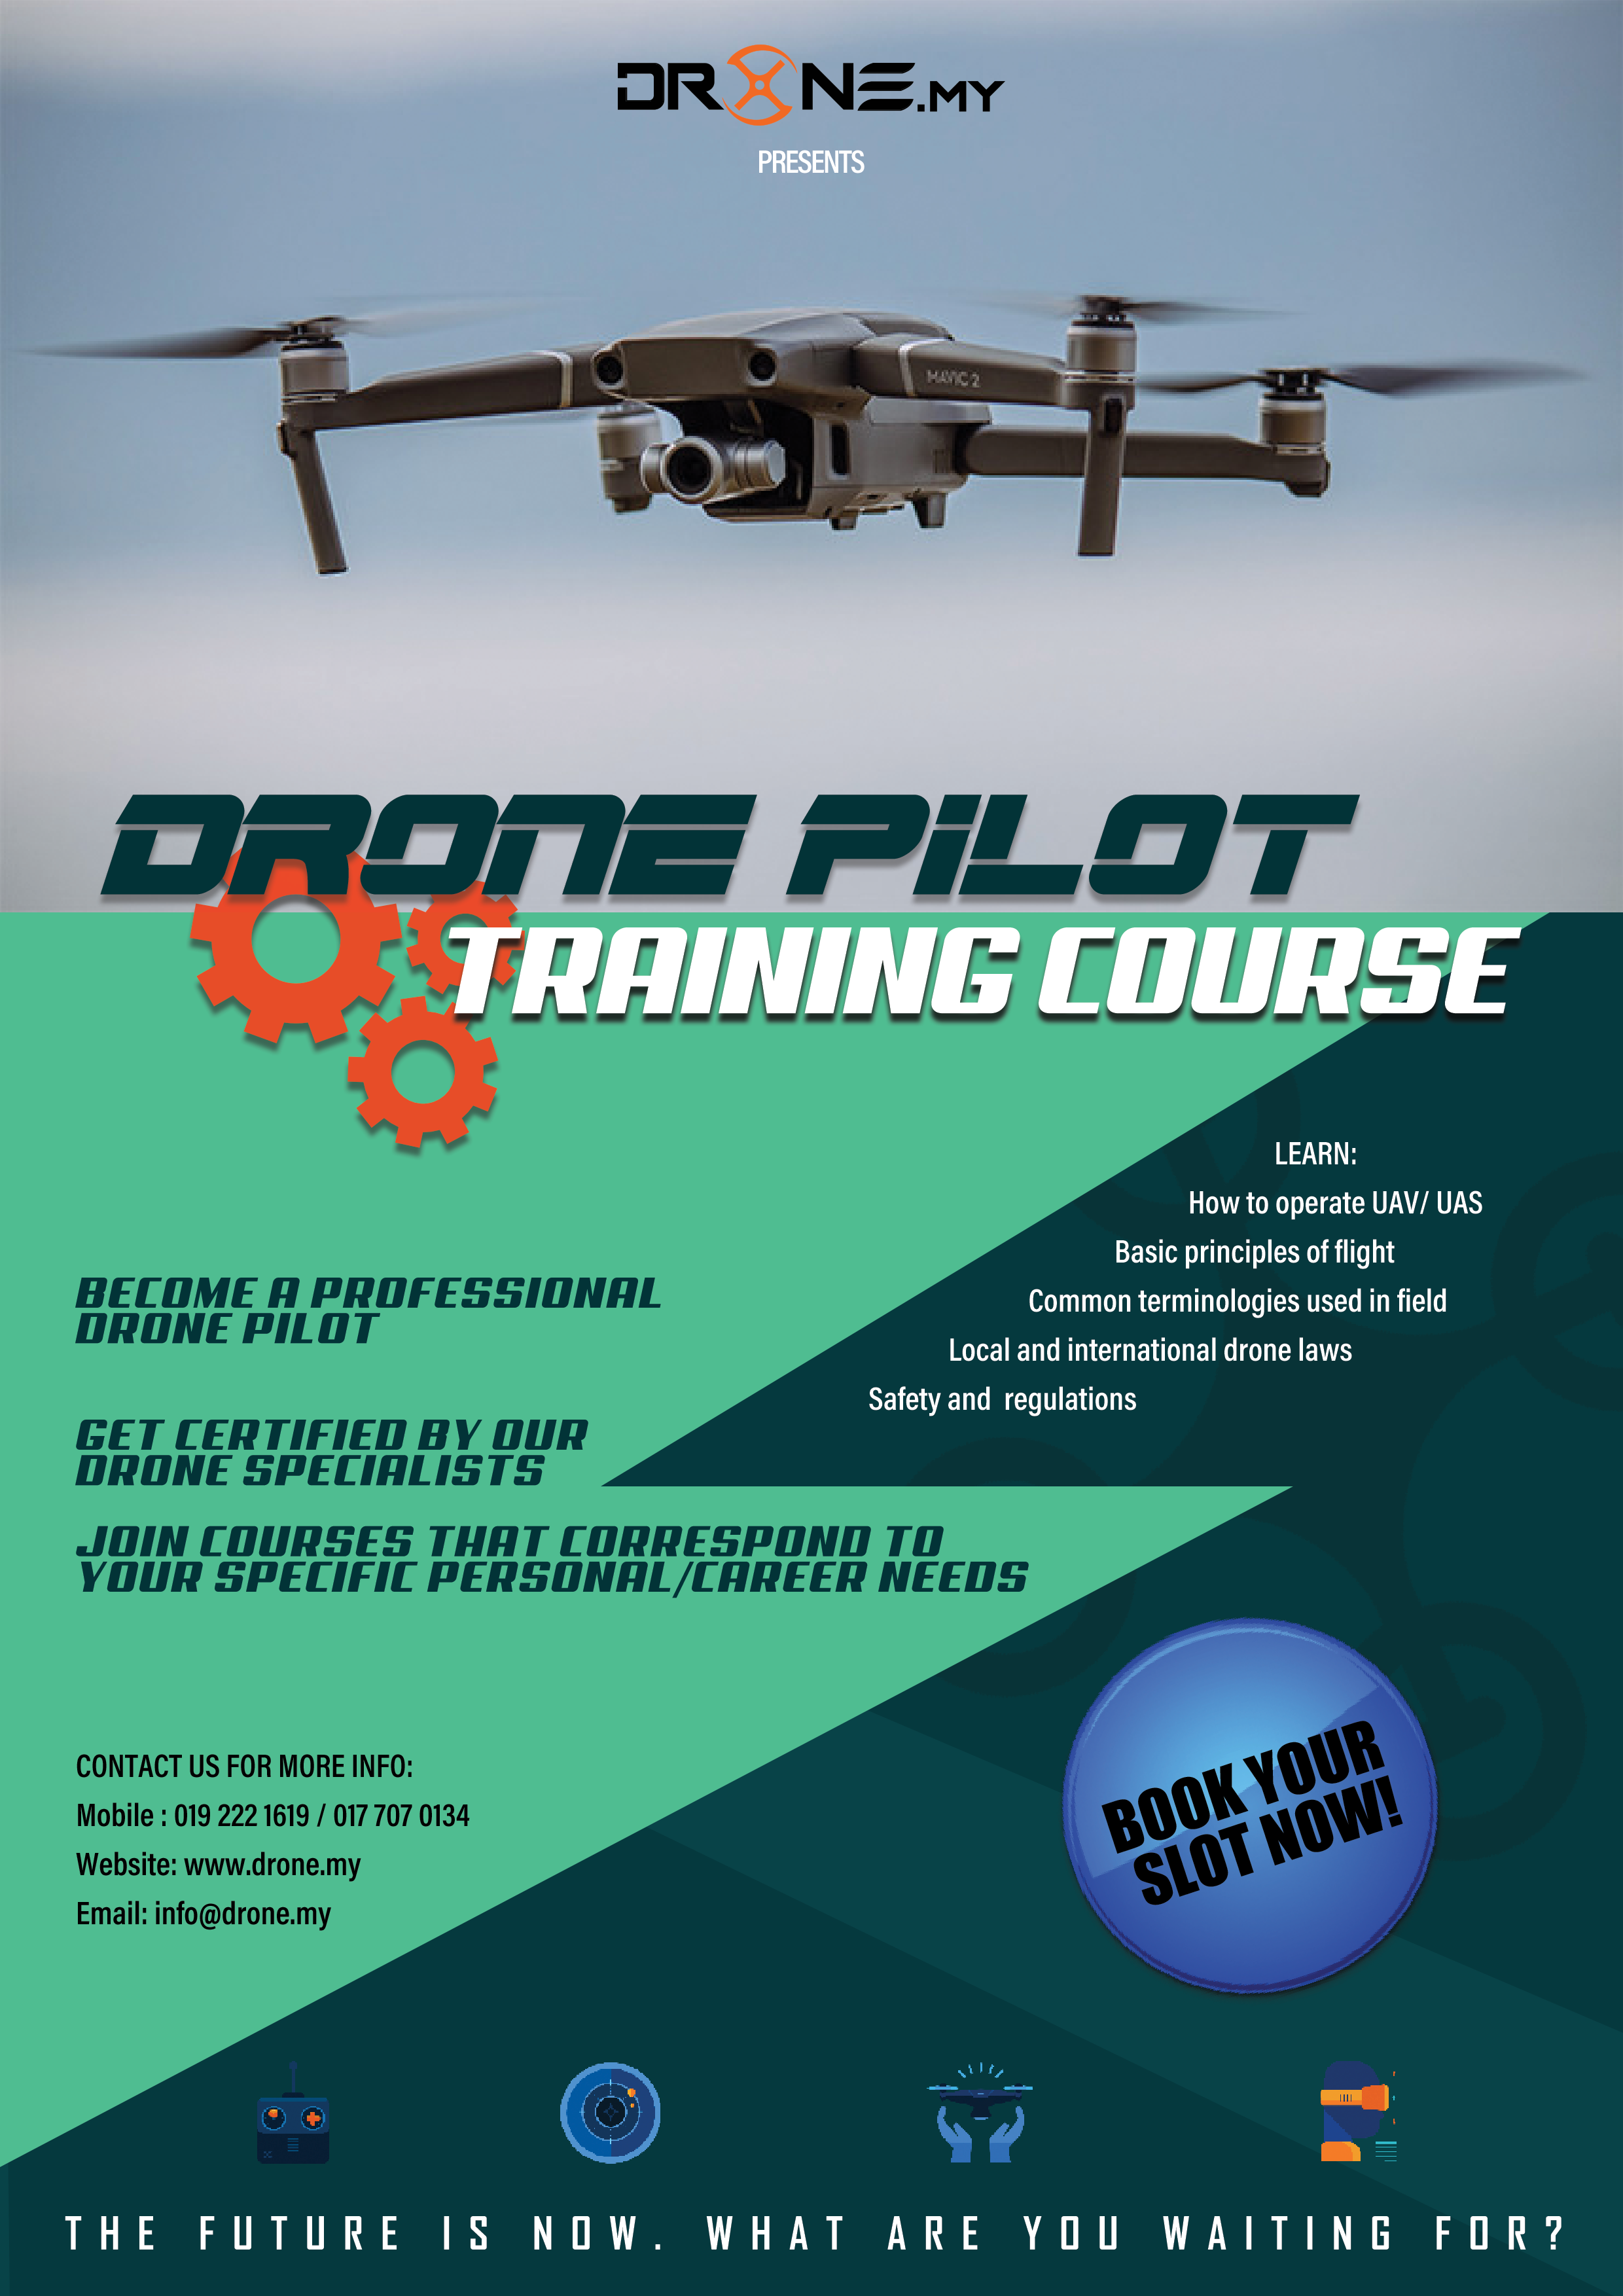 Training Course DRONE.MY